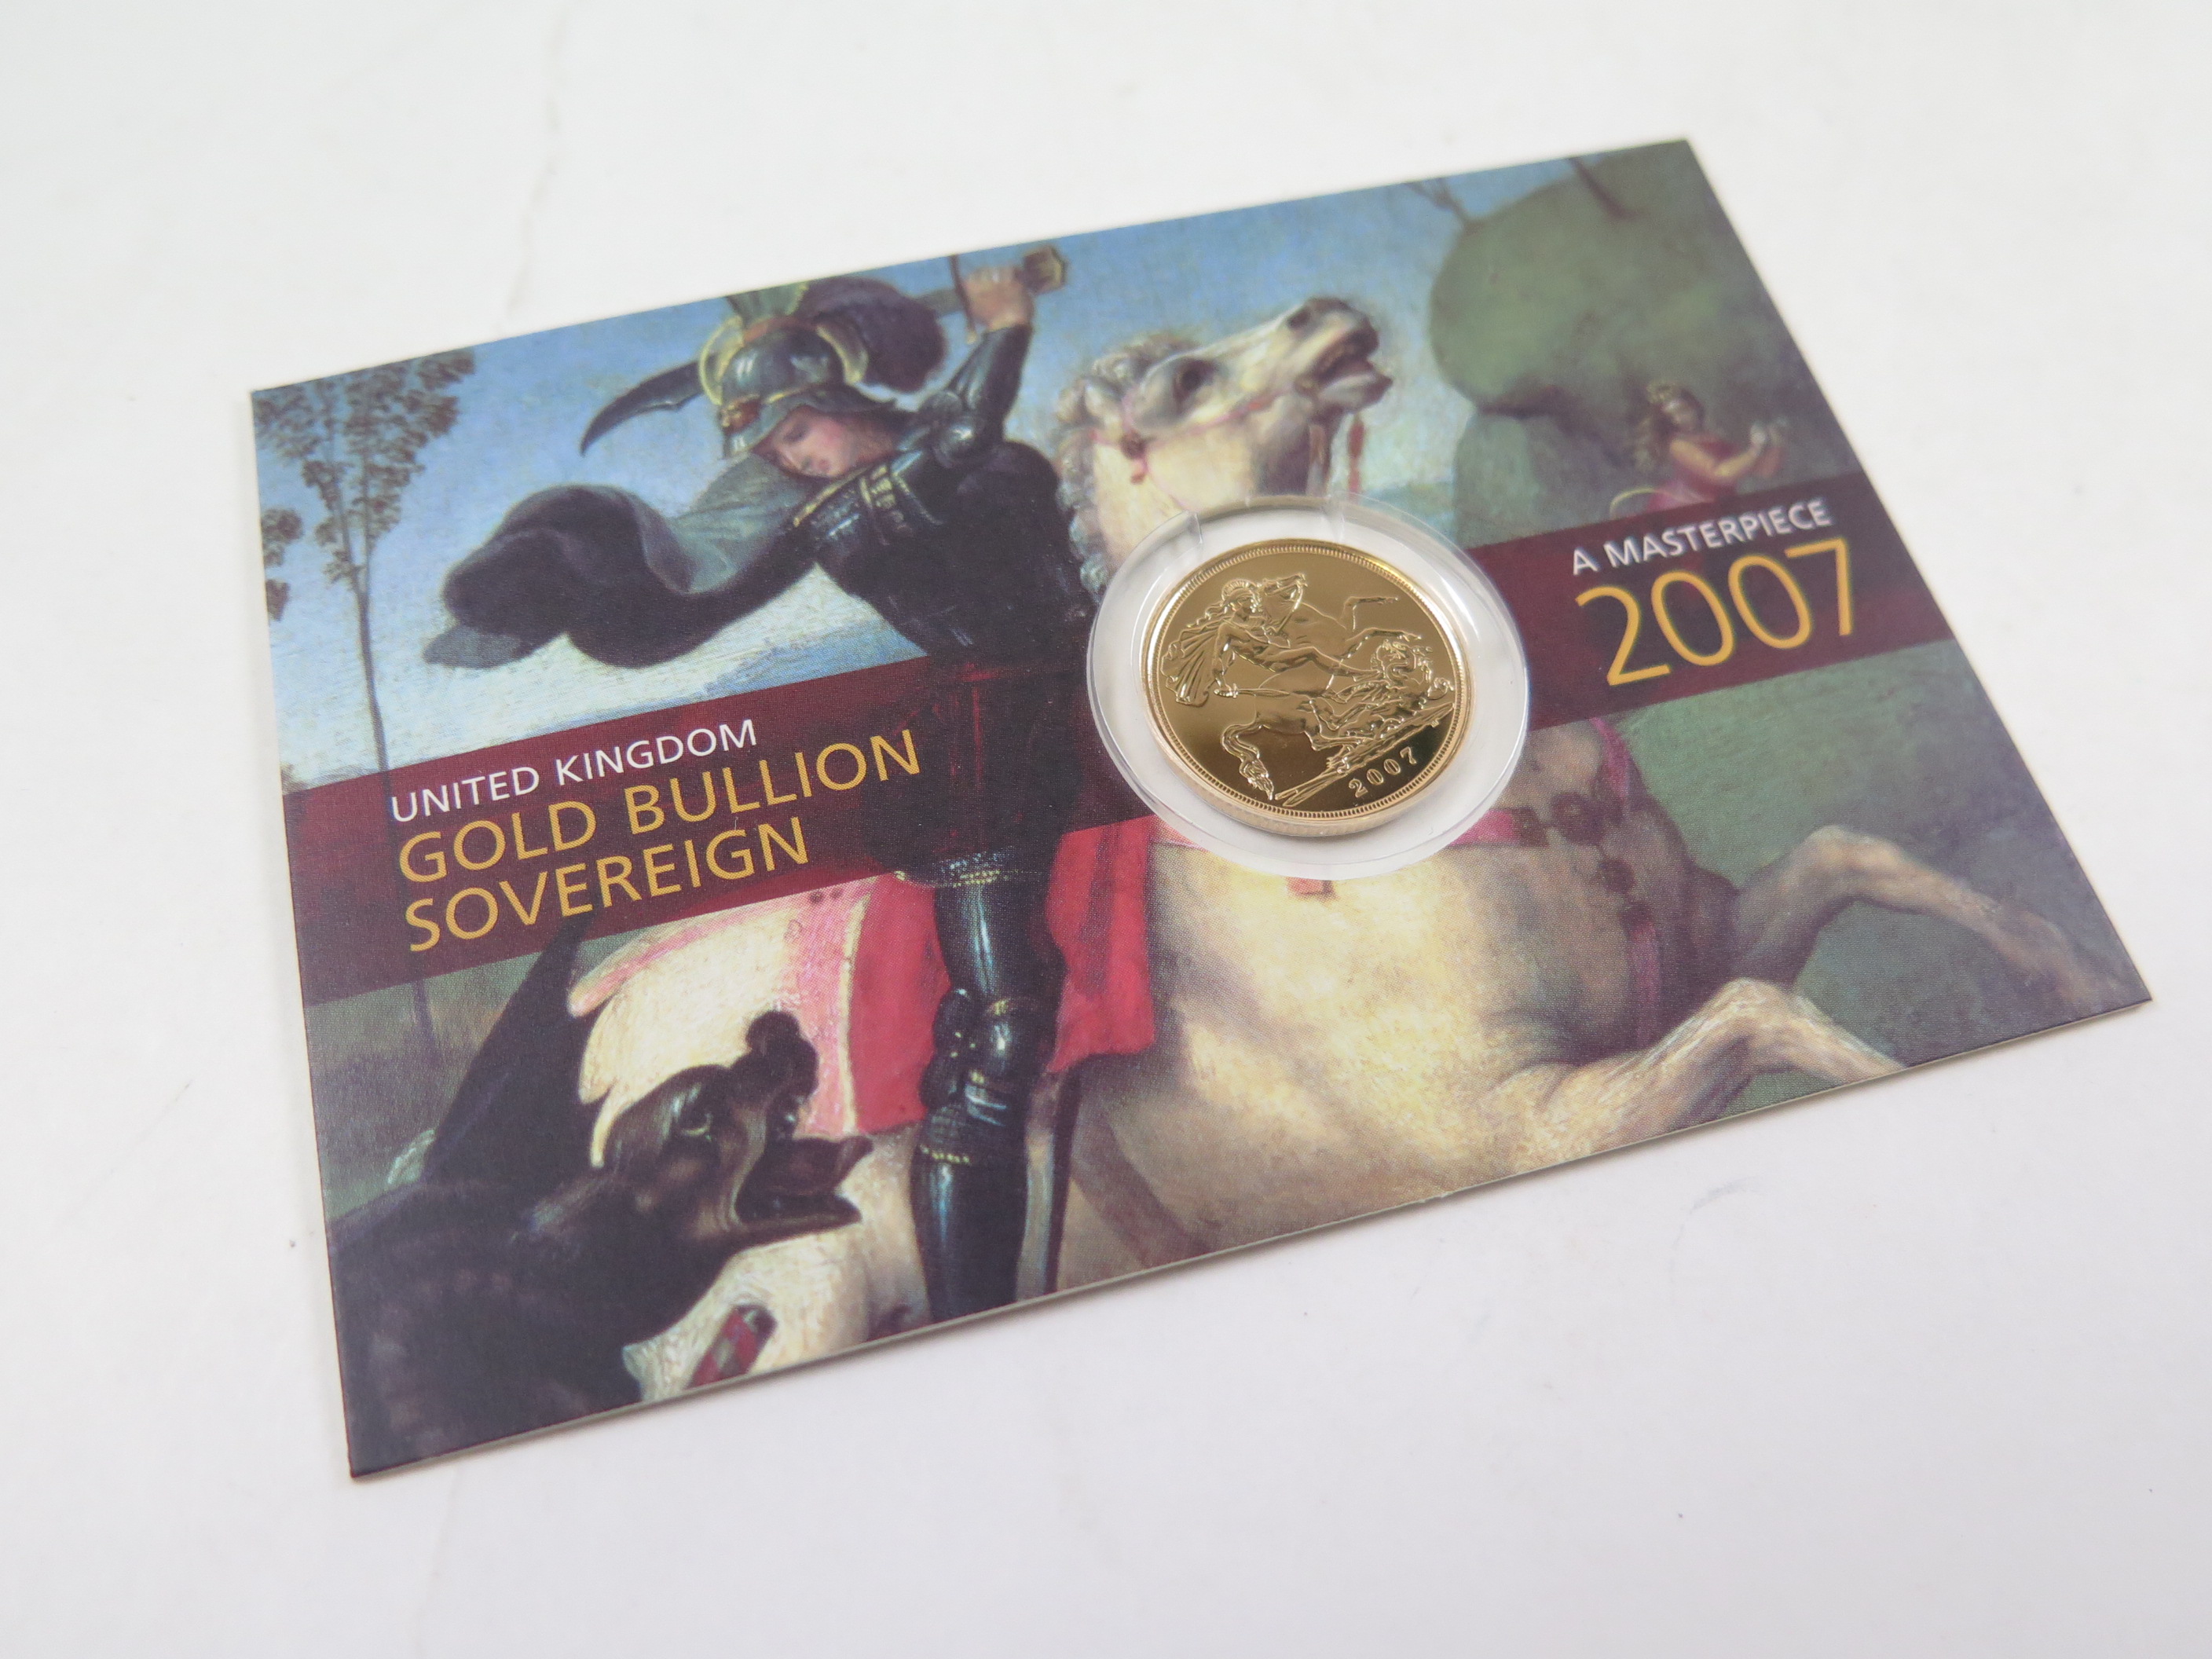 Sovereign 2007 BU in the "Royal Mint" packaging